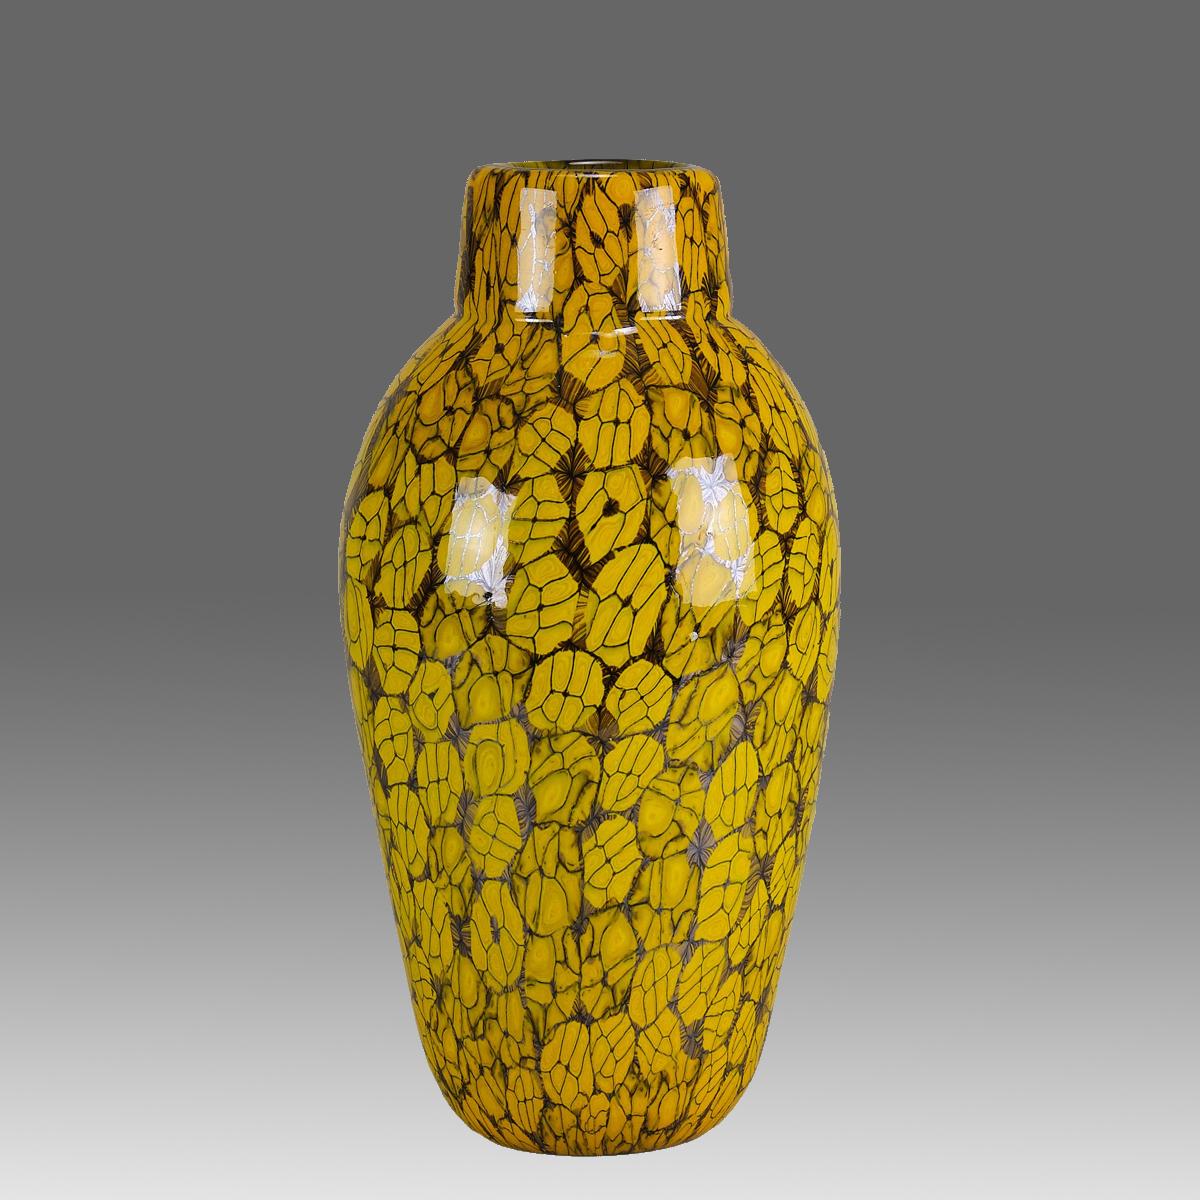 A vibrant modernist hand blown glass vase cased with an eyecatching Murrine yellow floral medallion design with brown borders. Signed Ferro Vittorio and with original Murano label

ADDITIONAL INFORMATION
Height:                                     